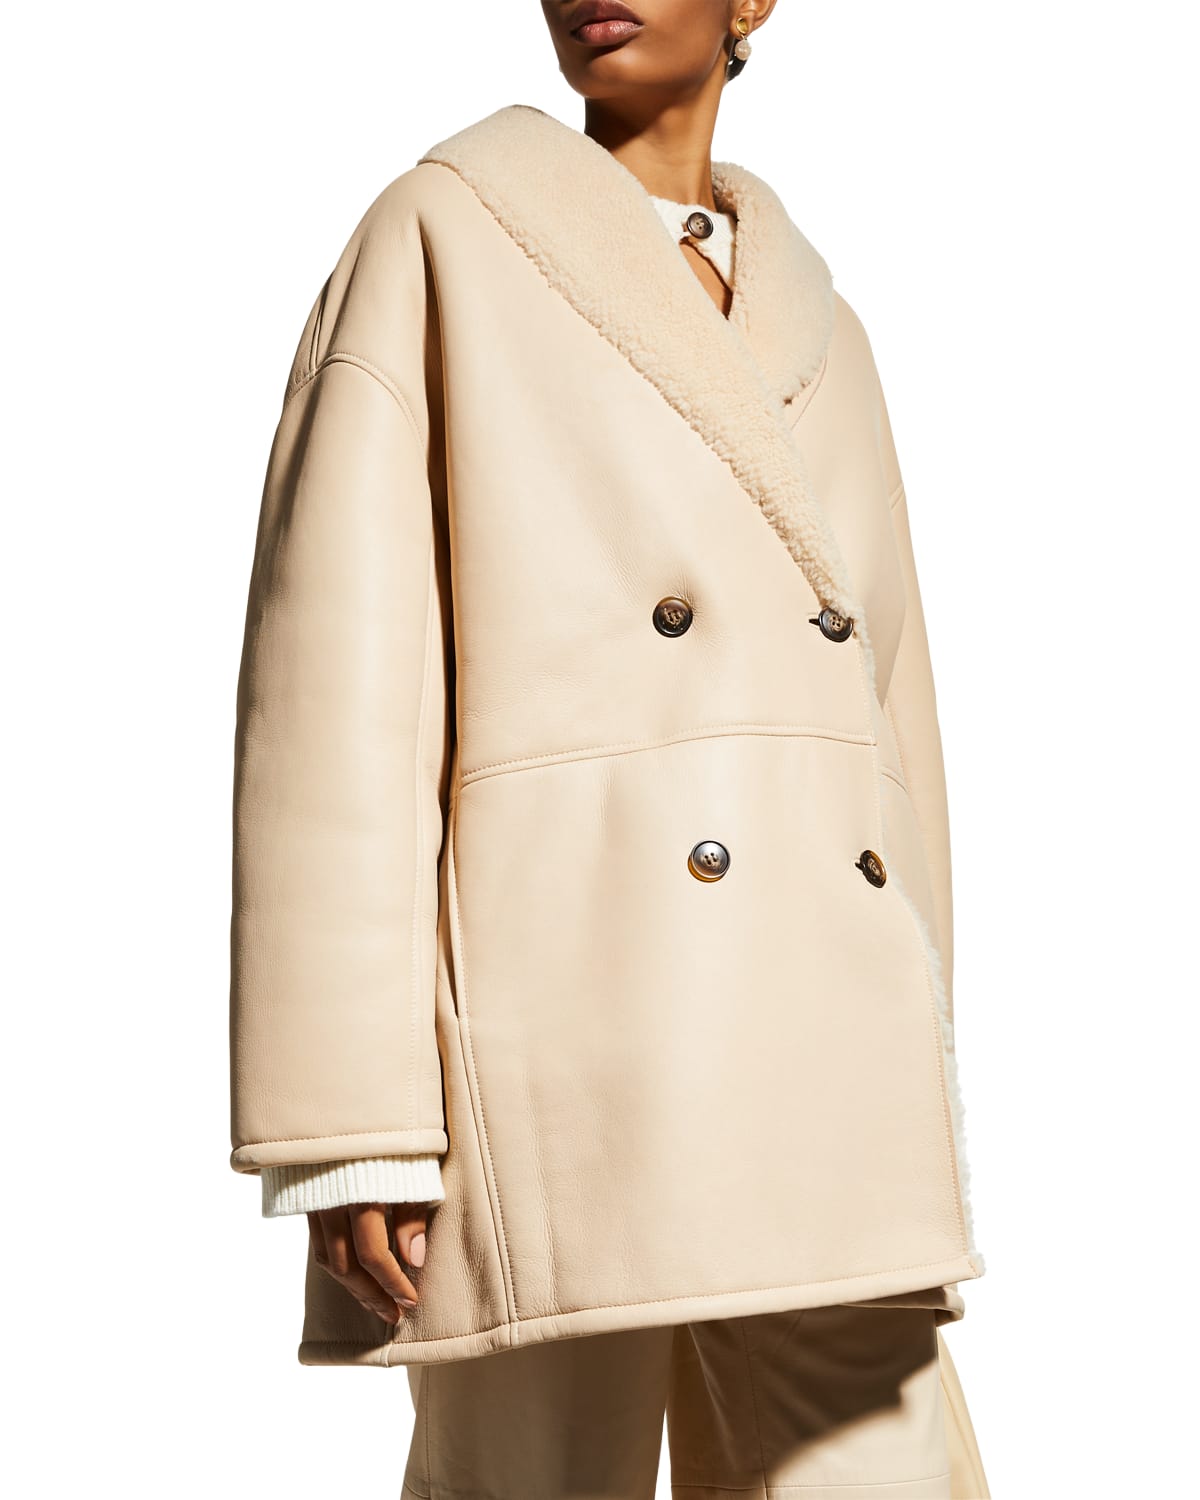 Loulou Studio Double-Breasted Shearling Coat